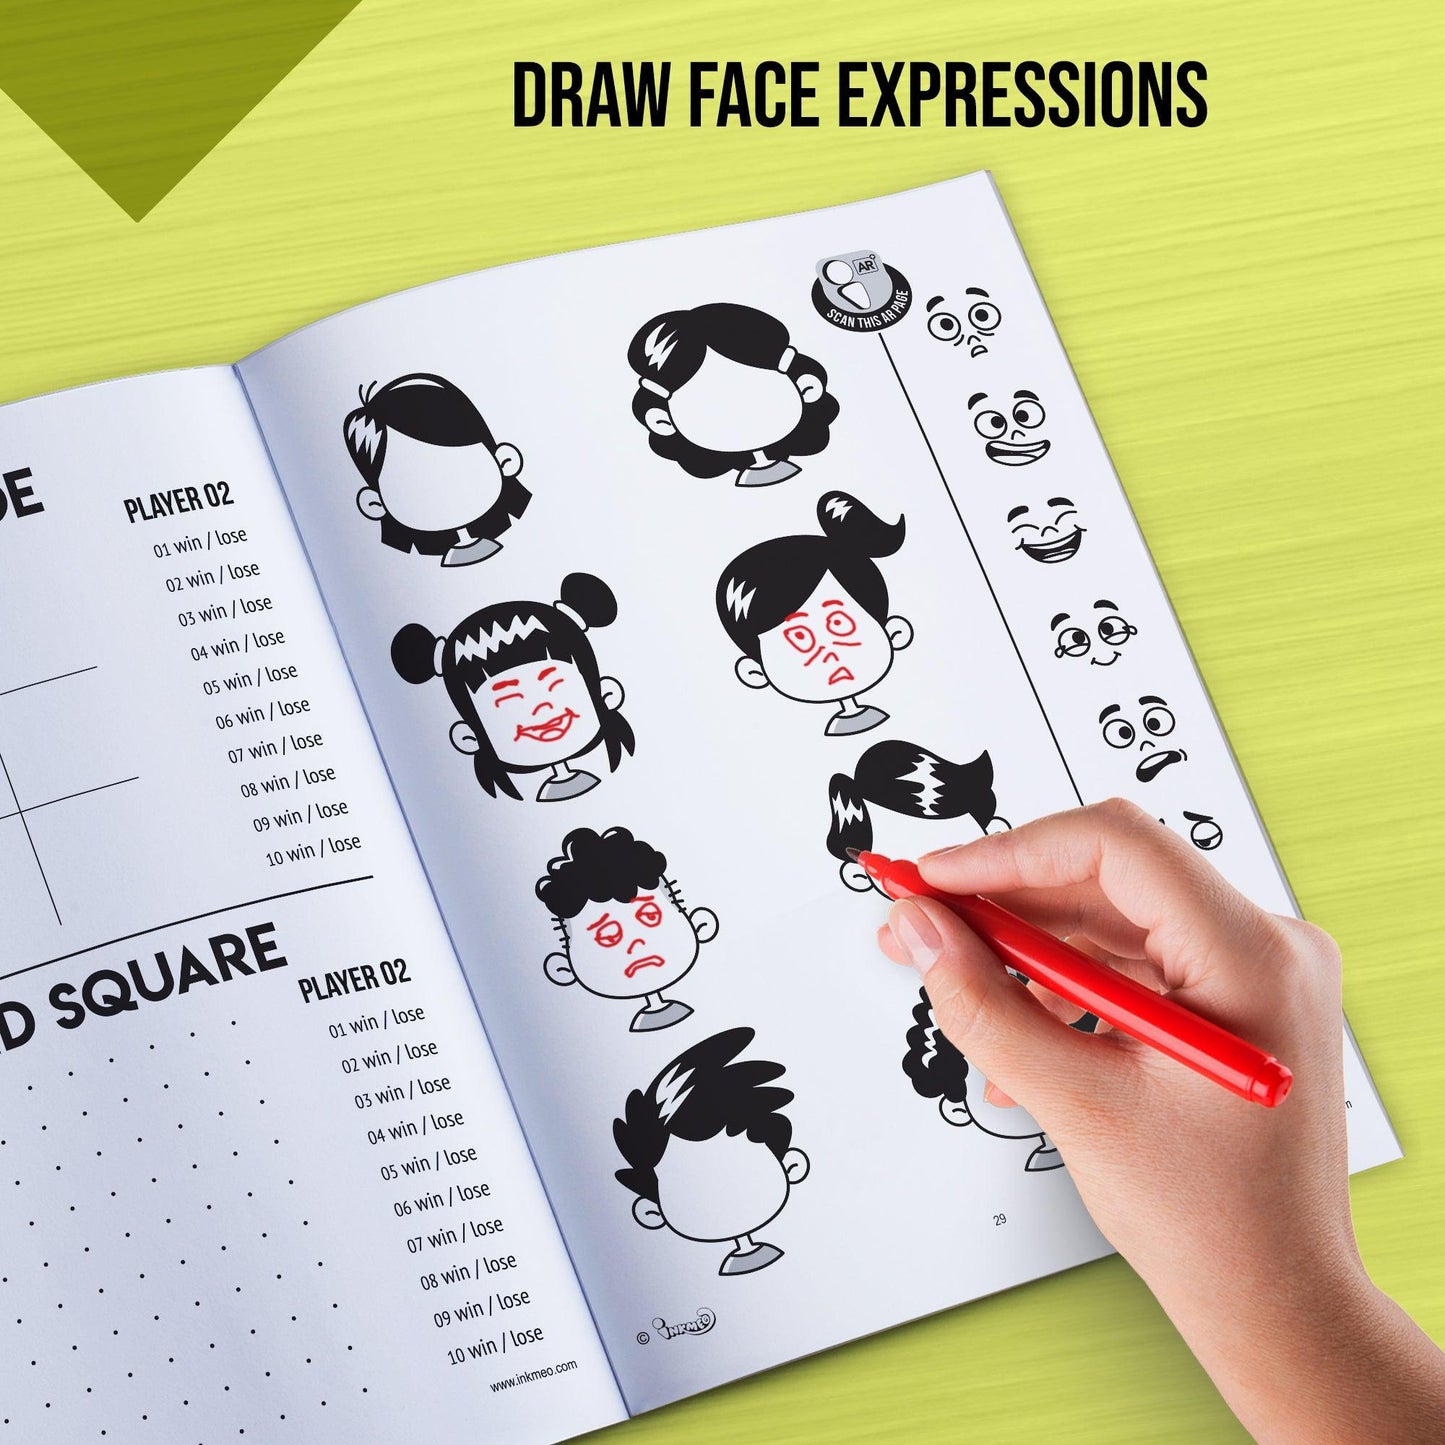 the mage shows the hand drawing various face expressions in book